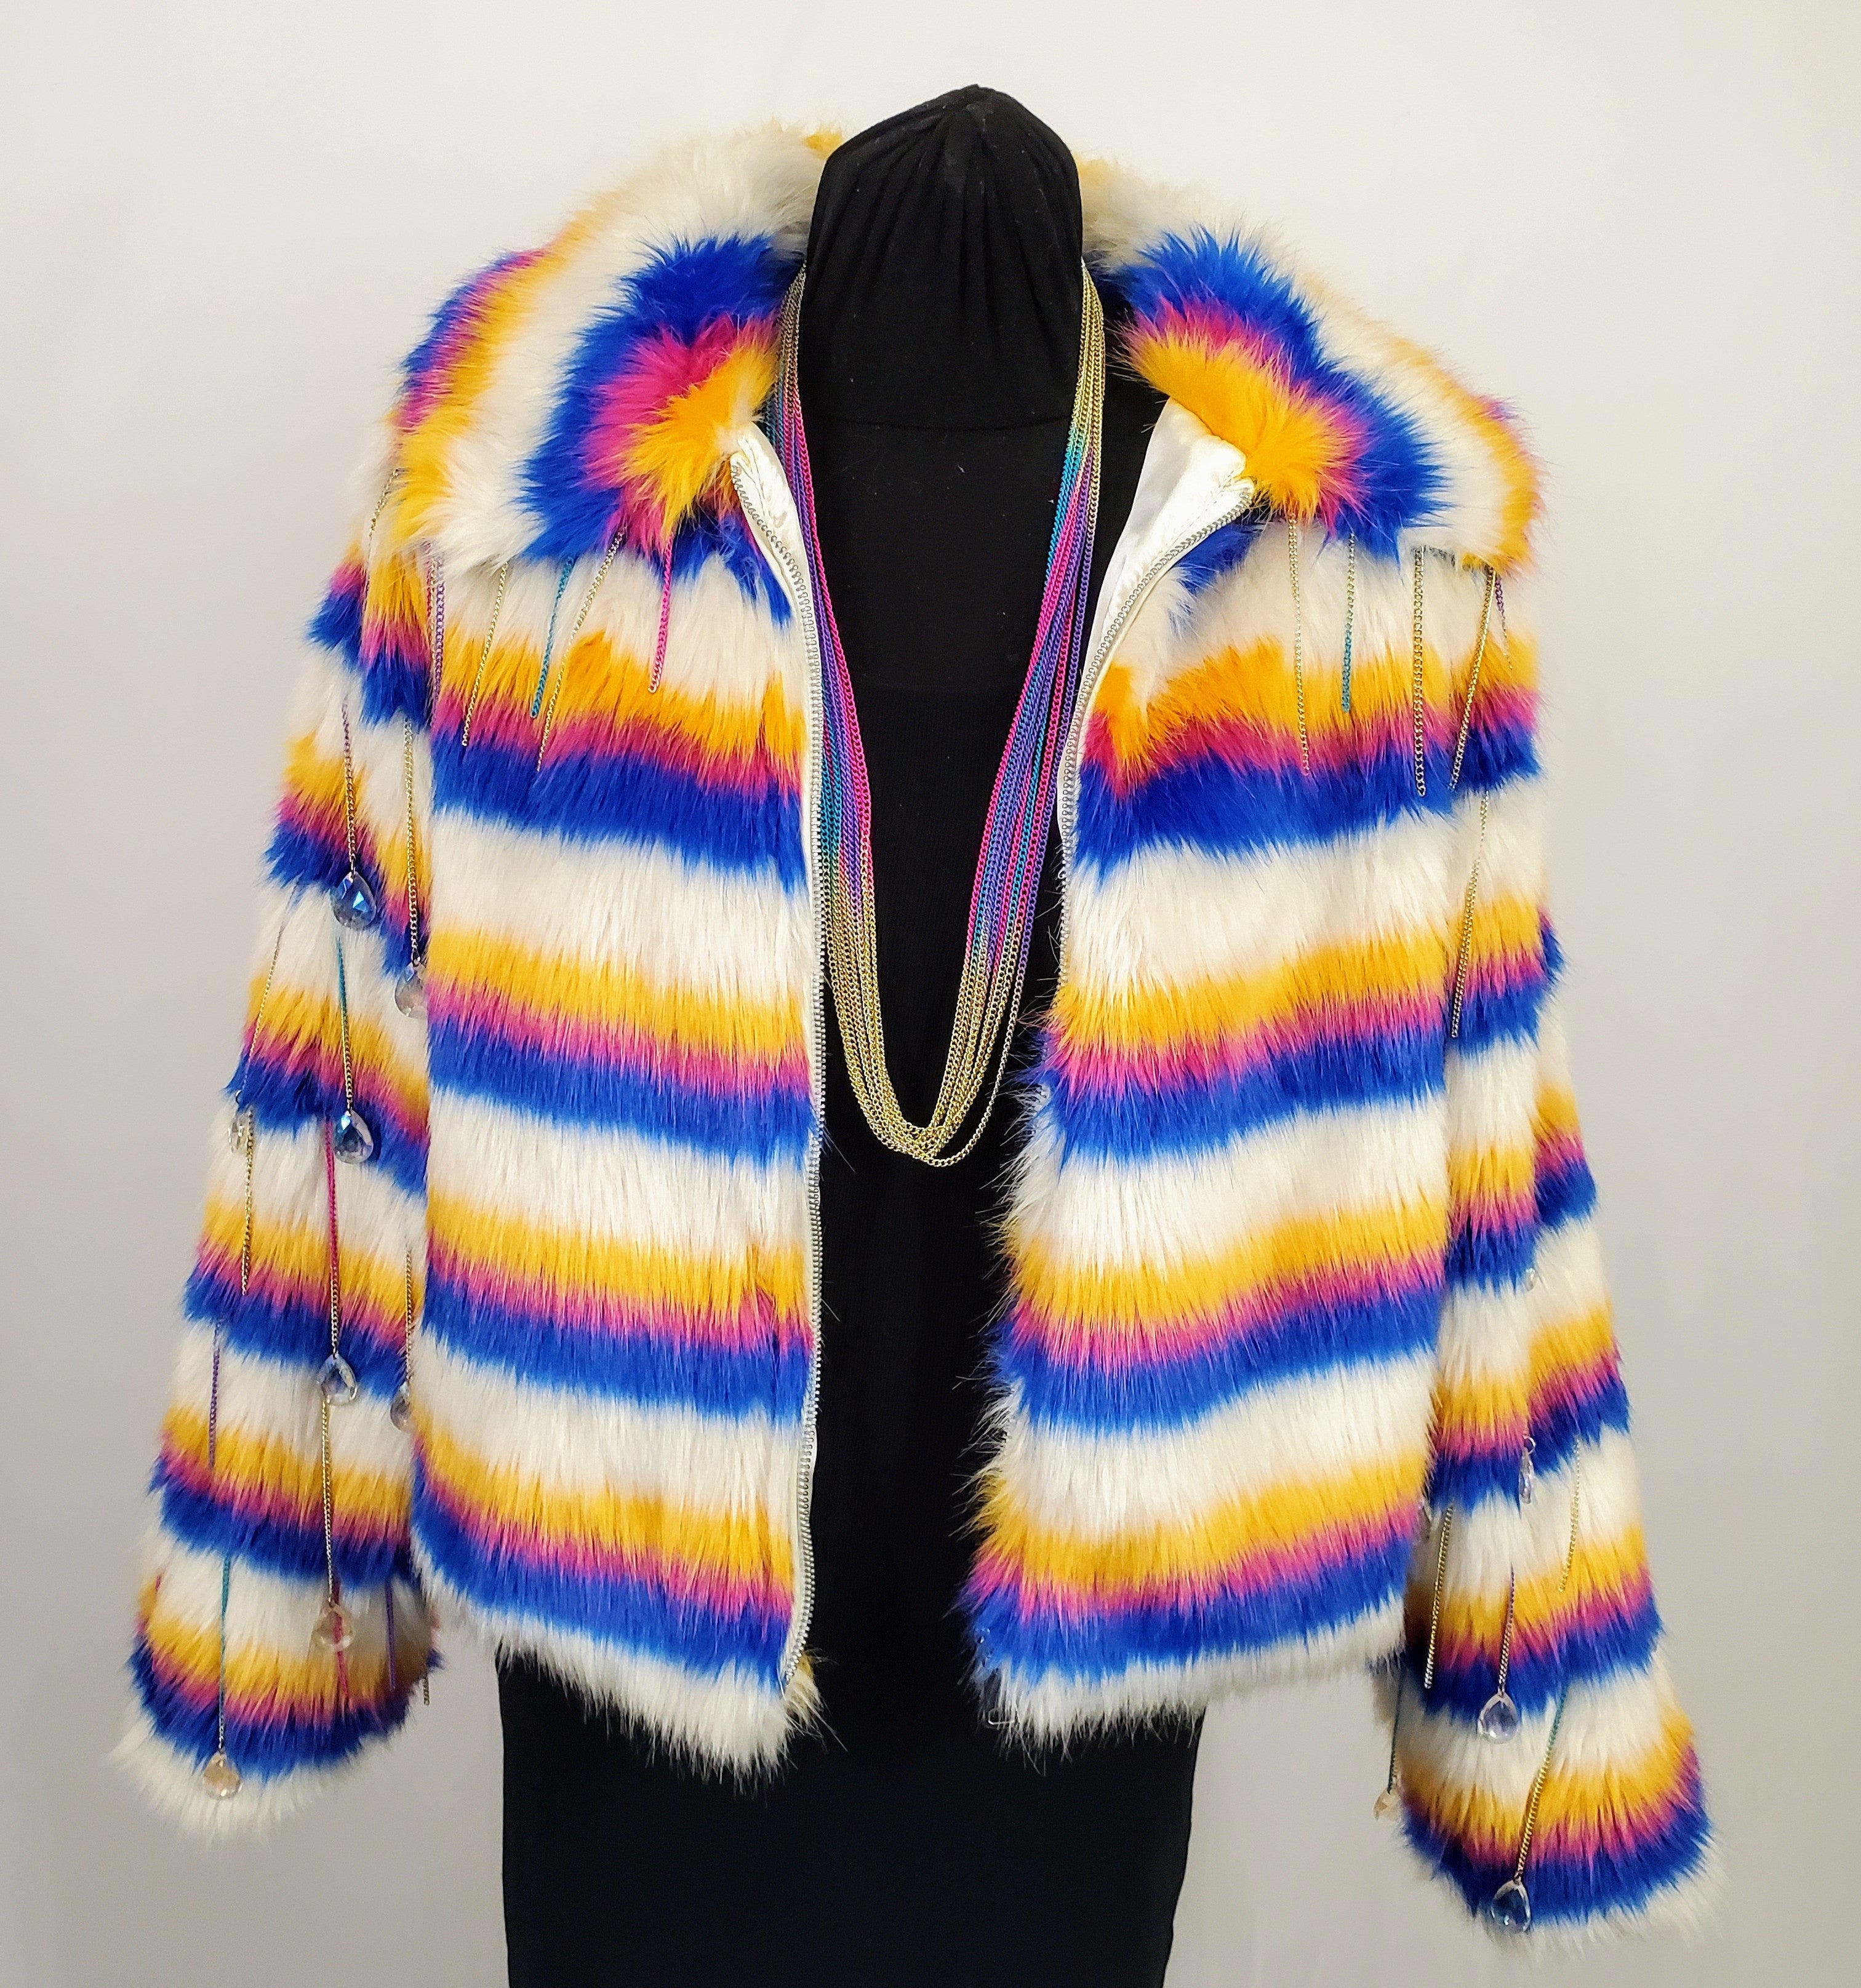 Handmade white rainbow striped faux fur coat with chain details open on mannequin